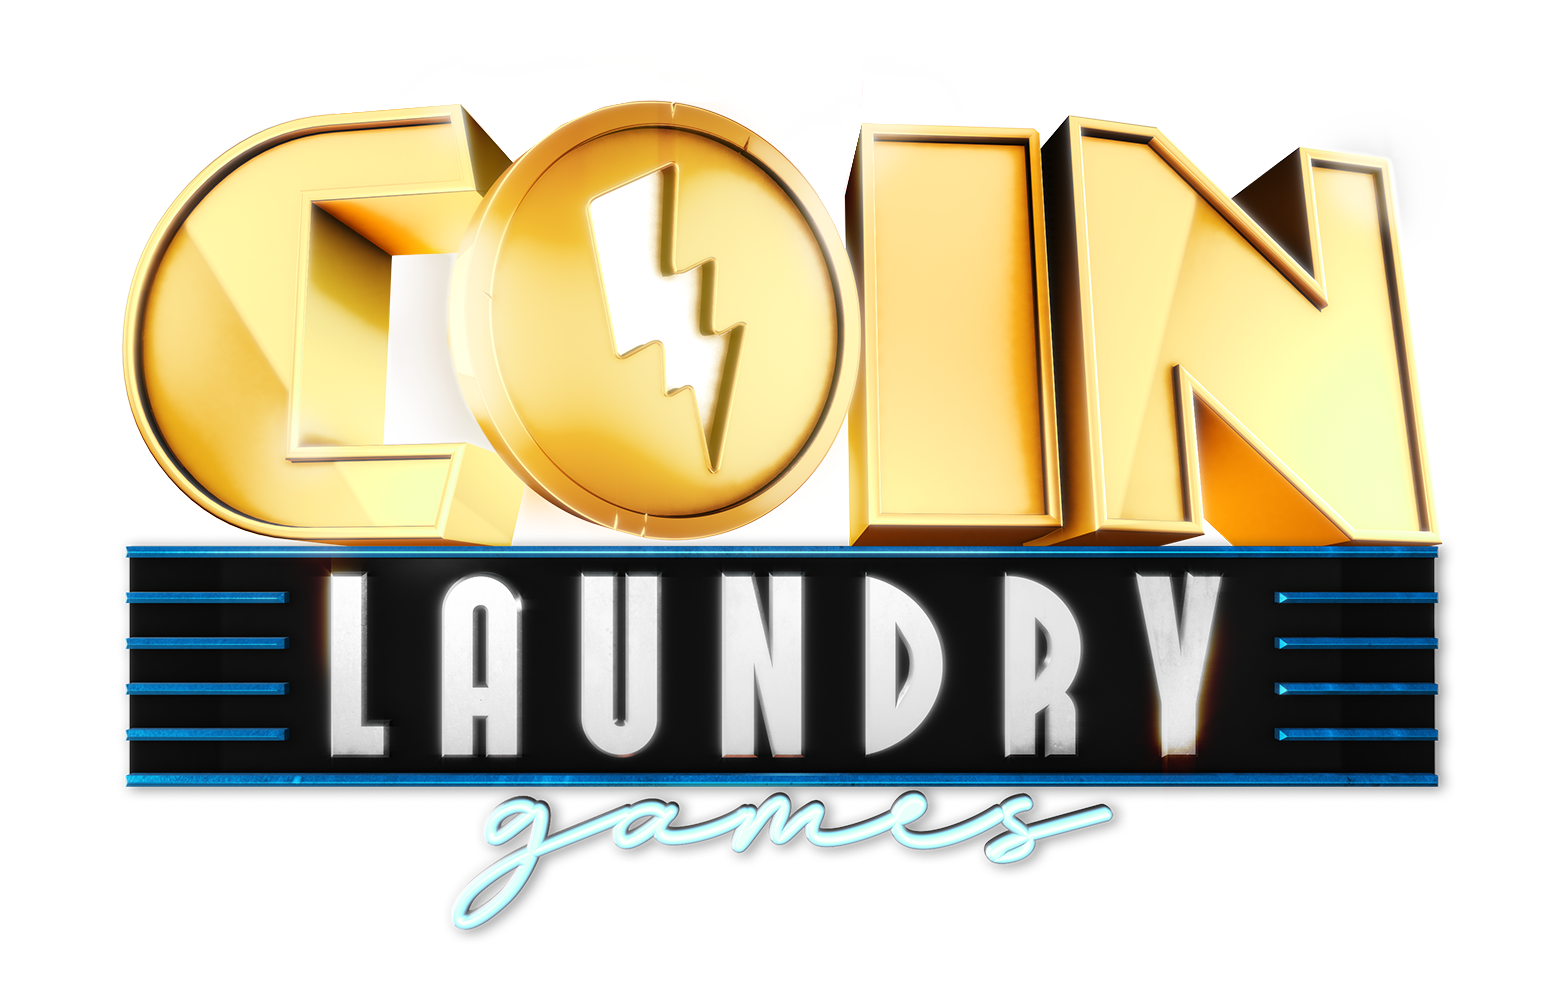 Coin Laundry Games